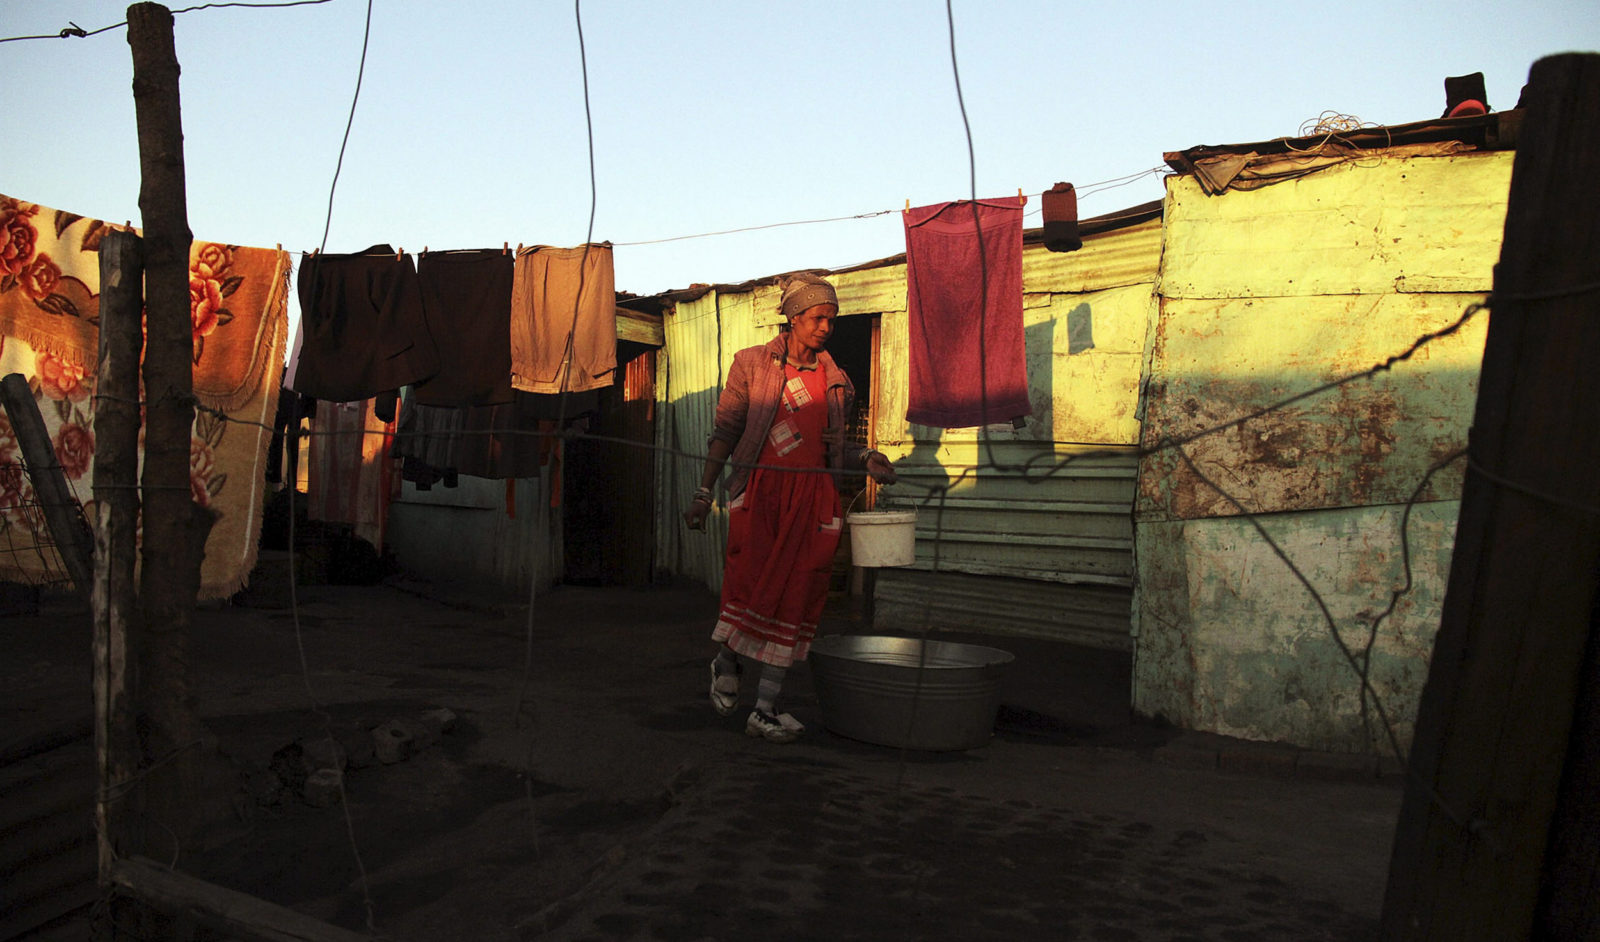 Press Release: SA Must Not Let Its Women Starve During Covid Pandemic